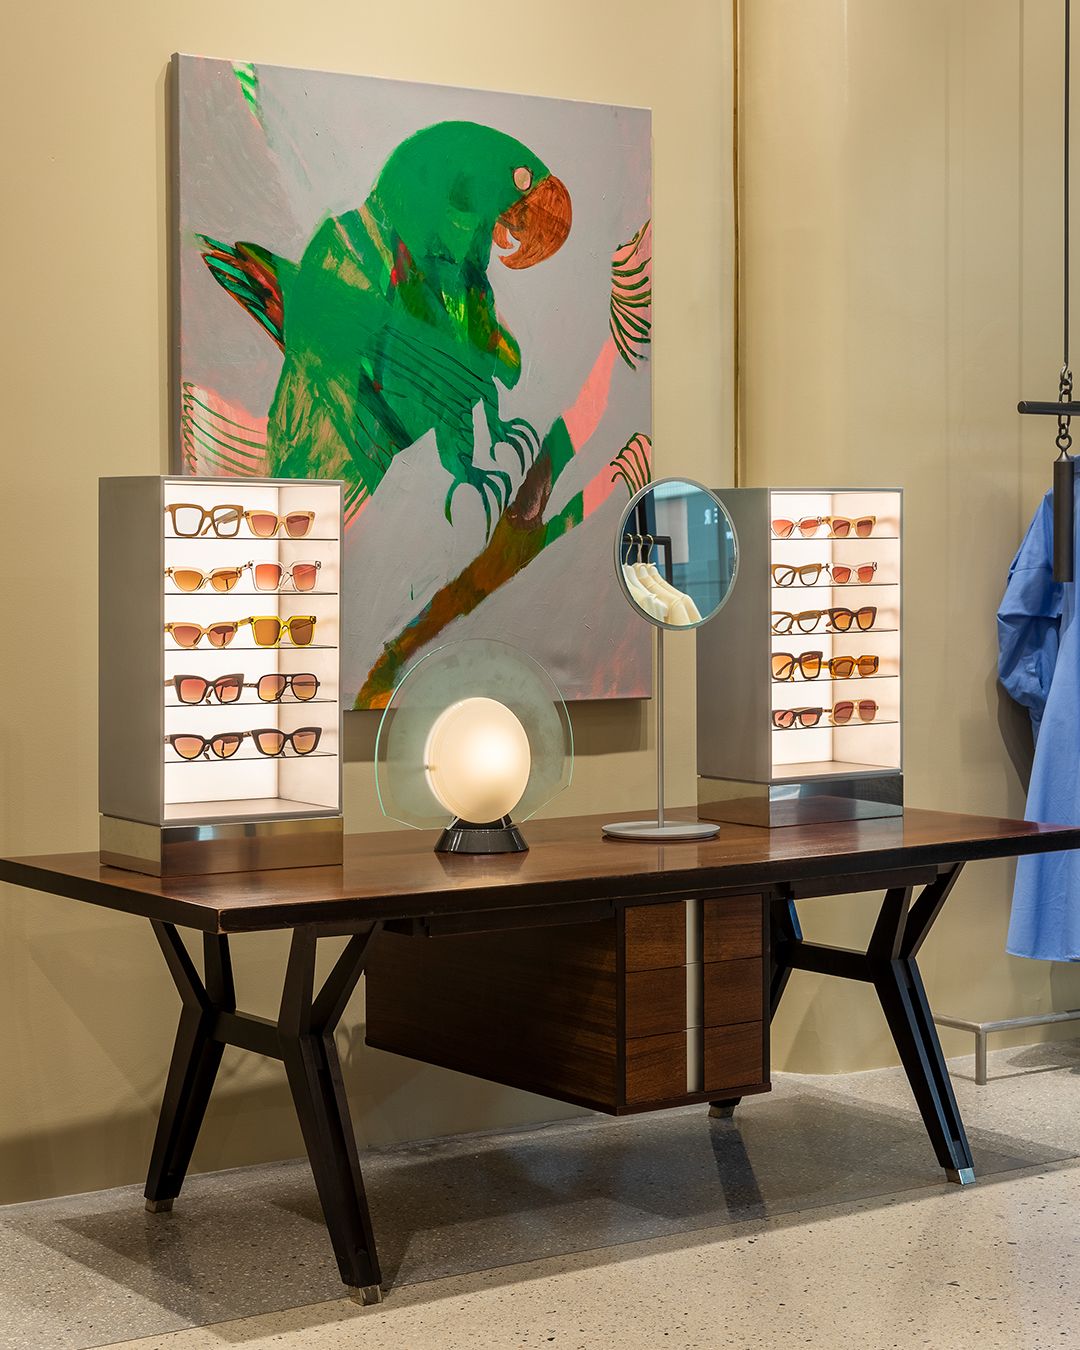 Sunglasses display on top of table with large painting of green parrot on the wall behind